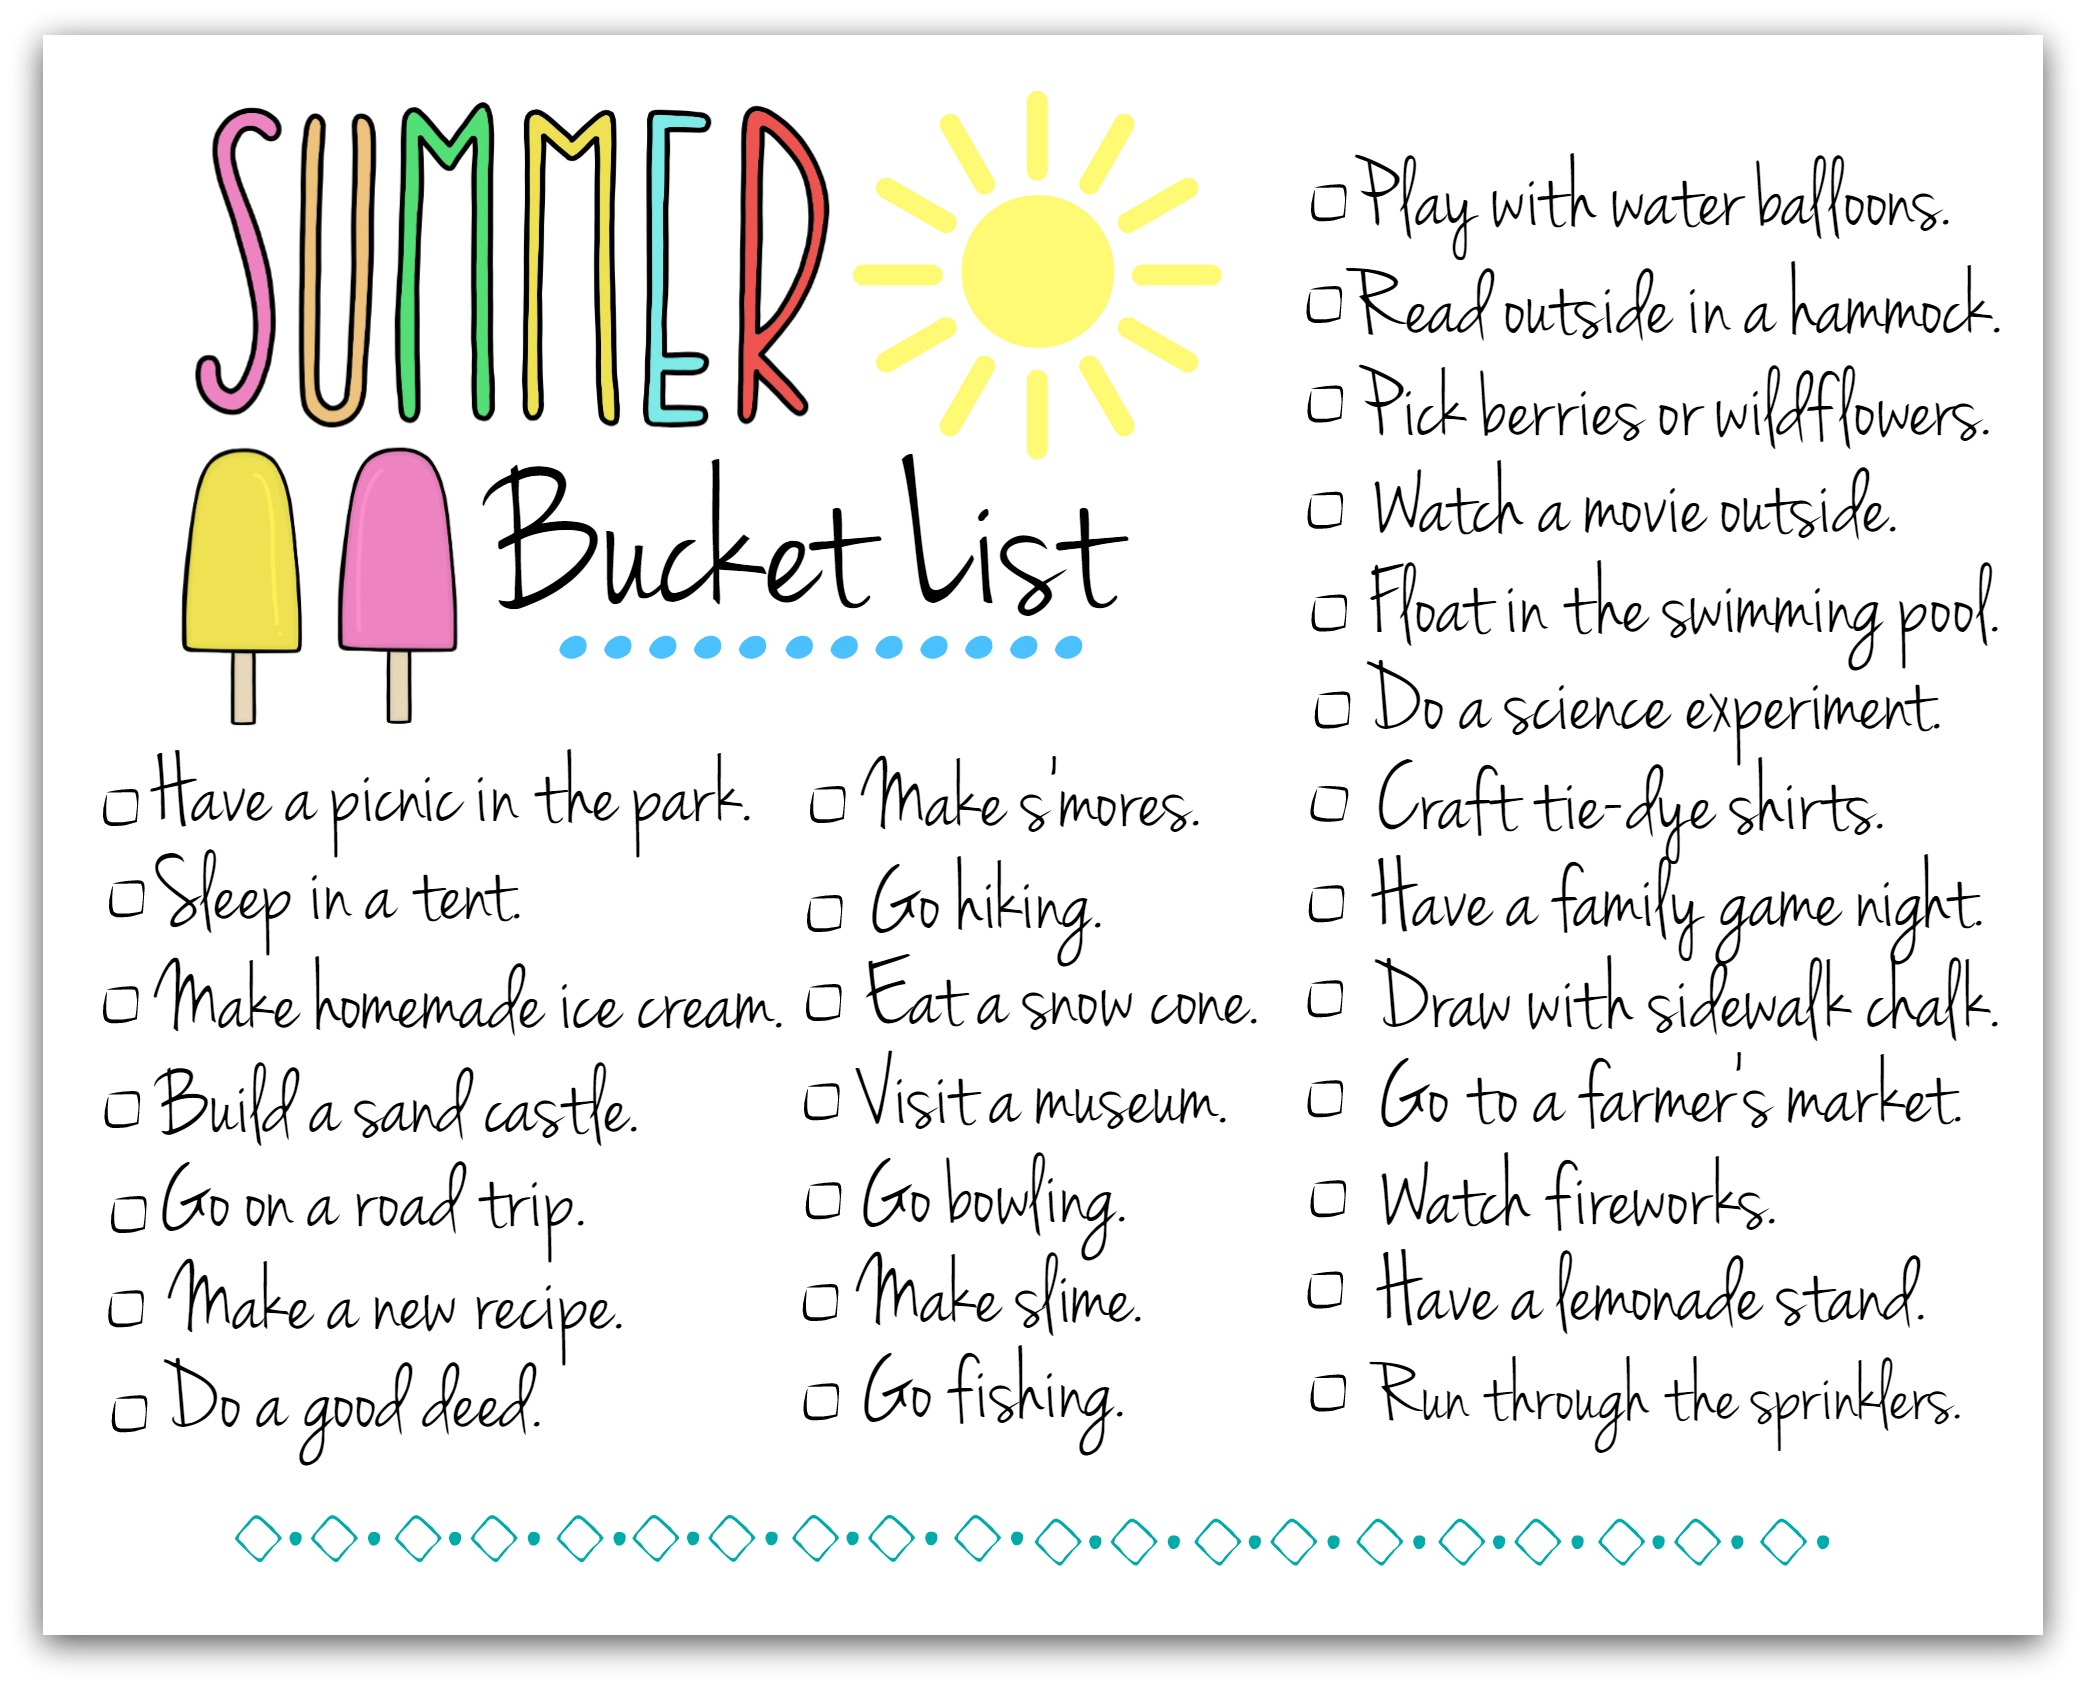 print-our-summer-bucket-list-for-fun-activity-ideas-it-s-free